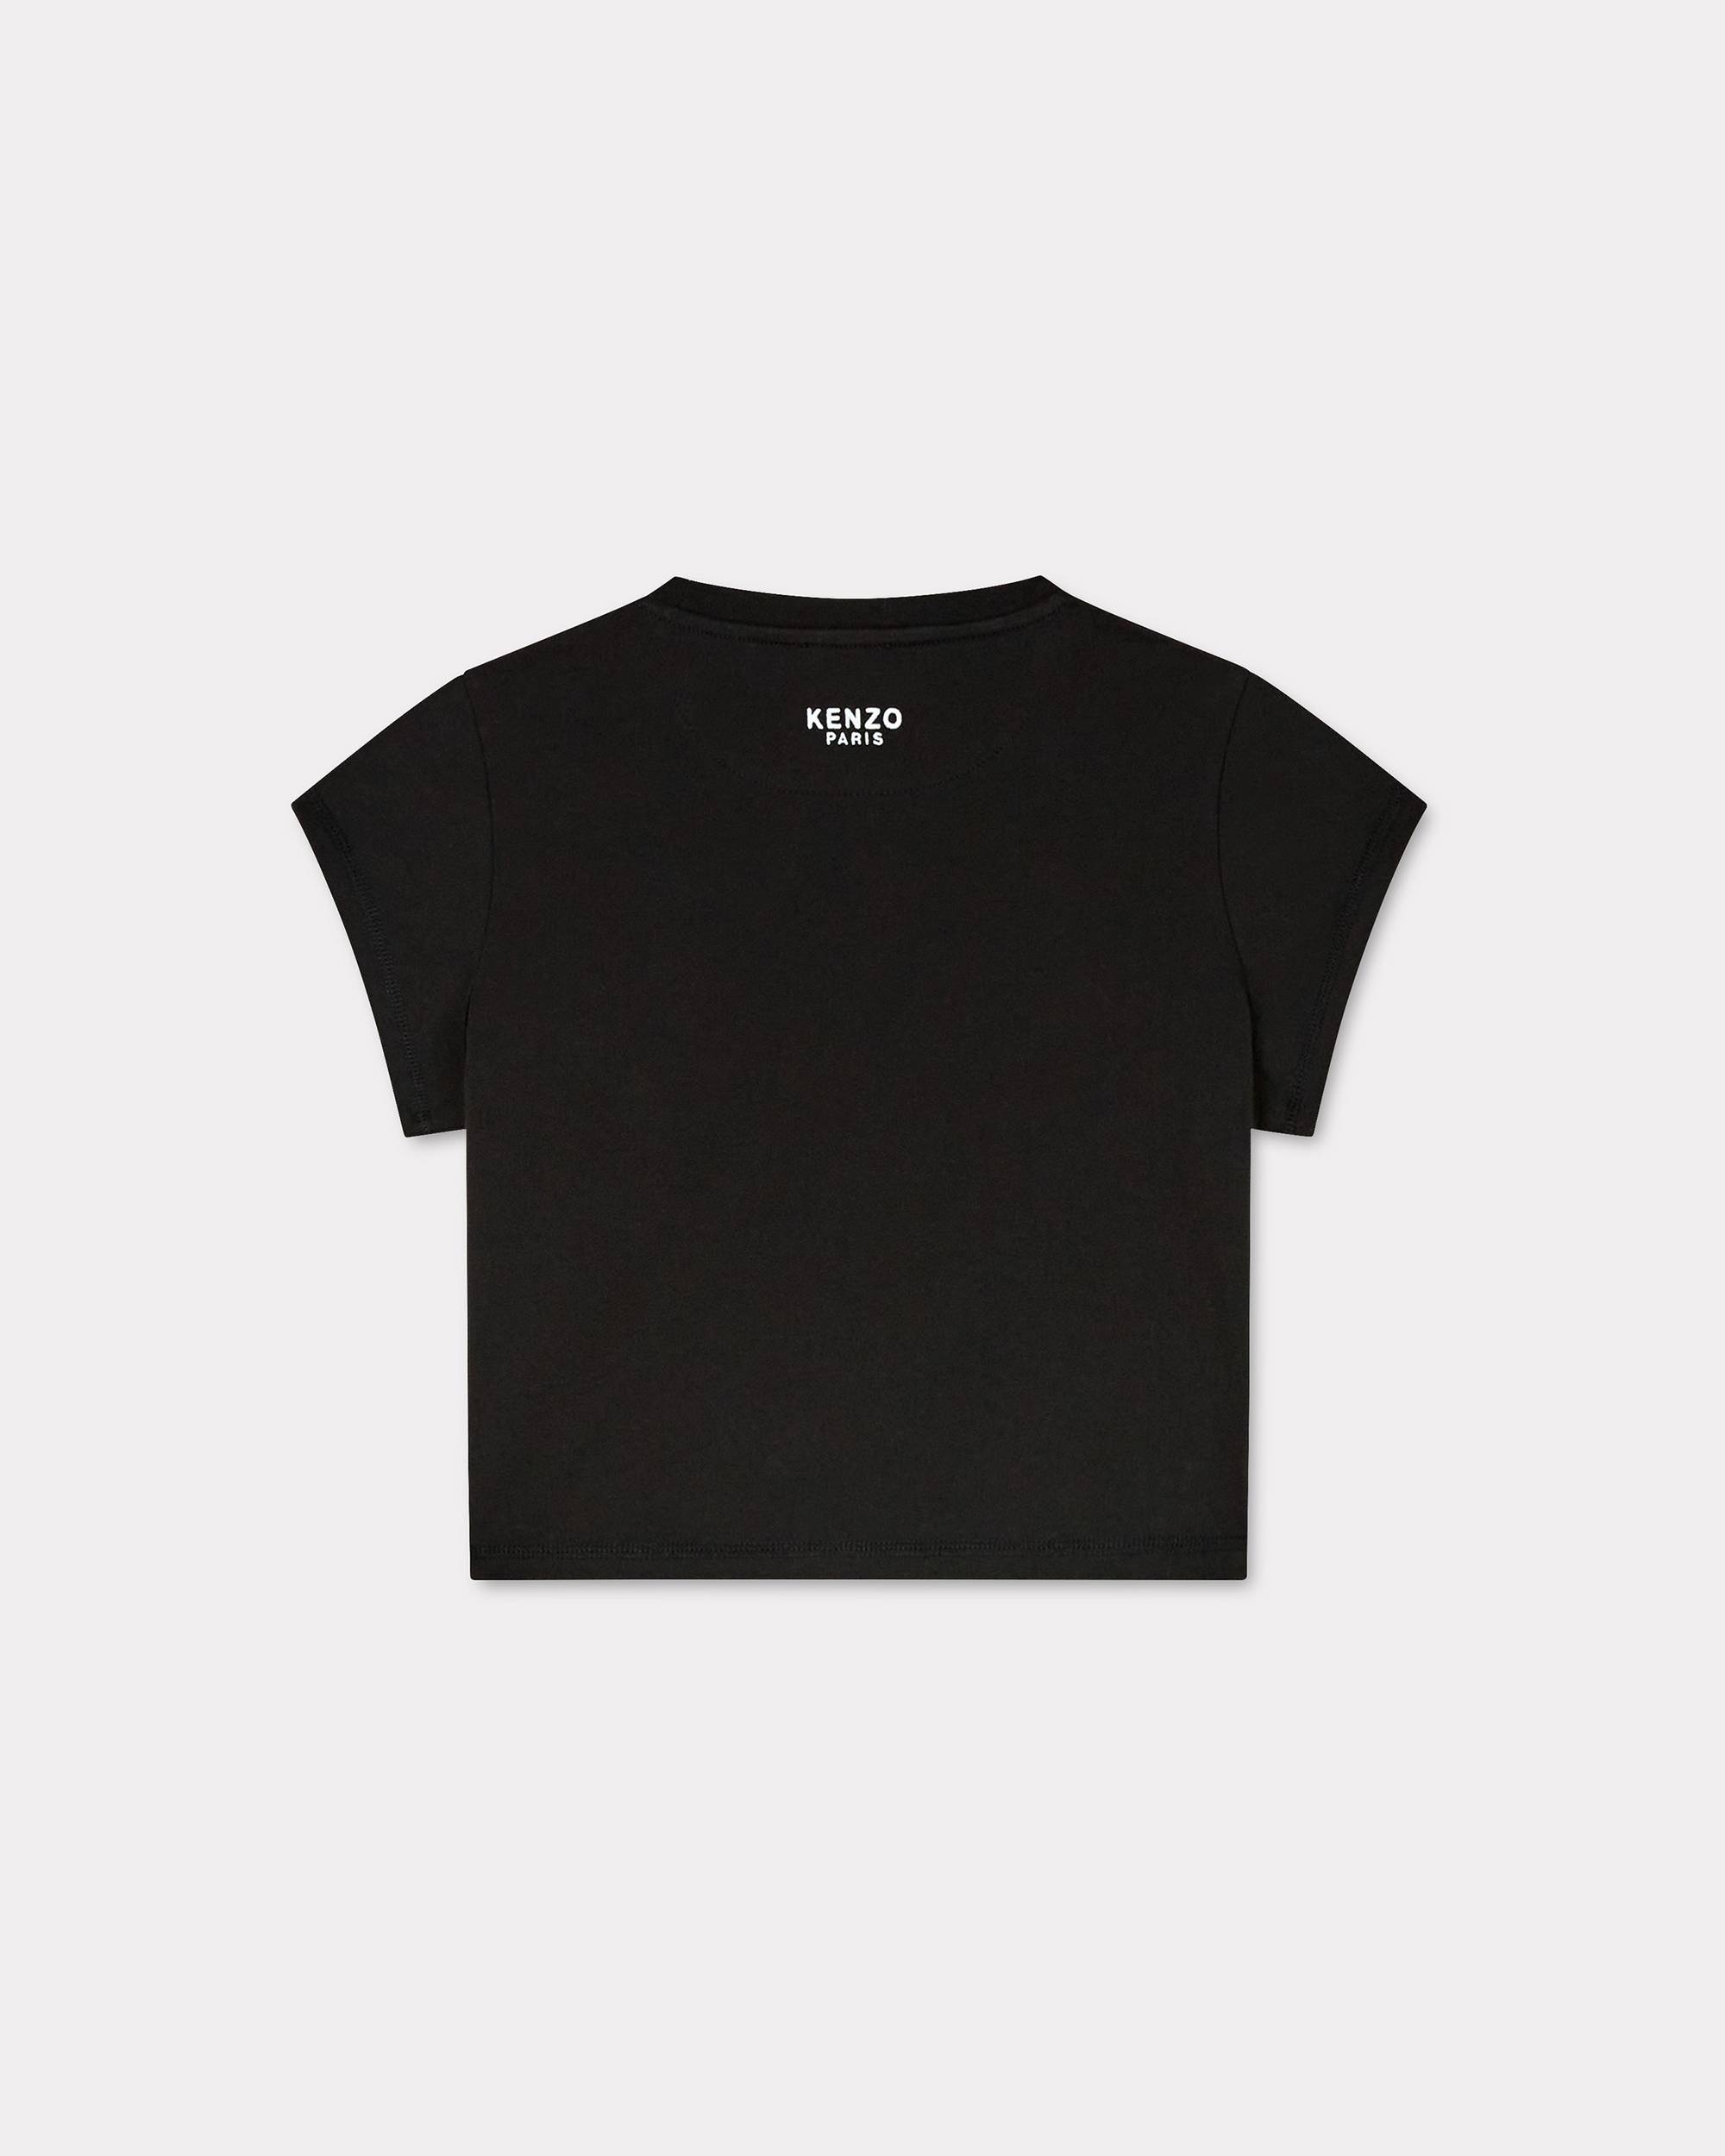 'Boke Flower' cropped embroidered T-shirt - 2